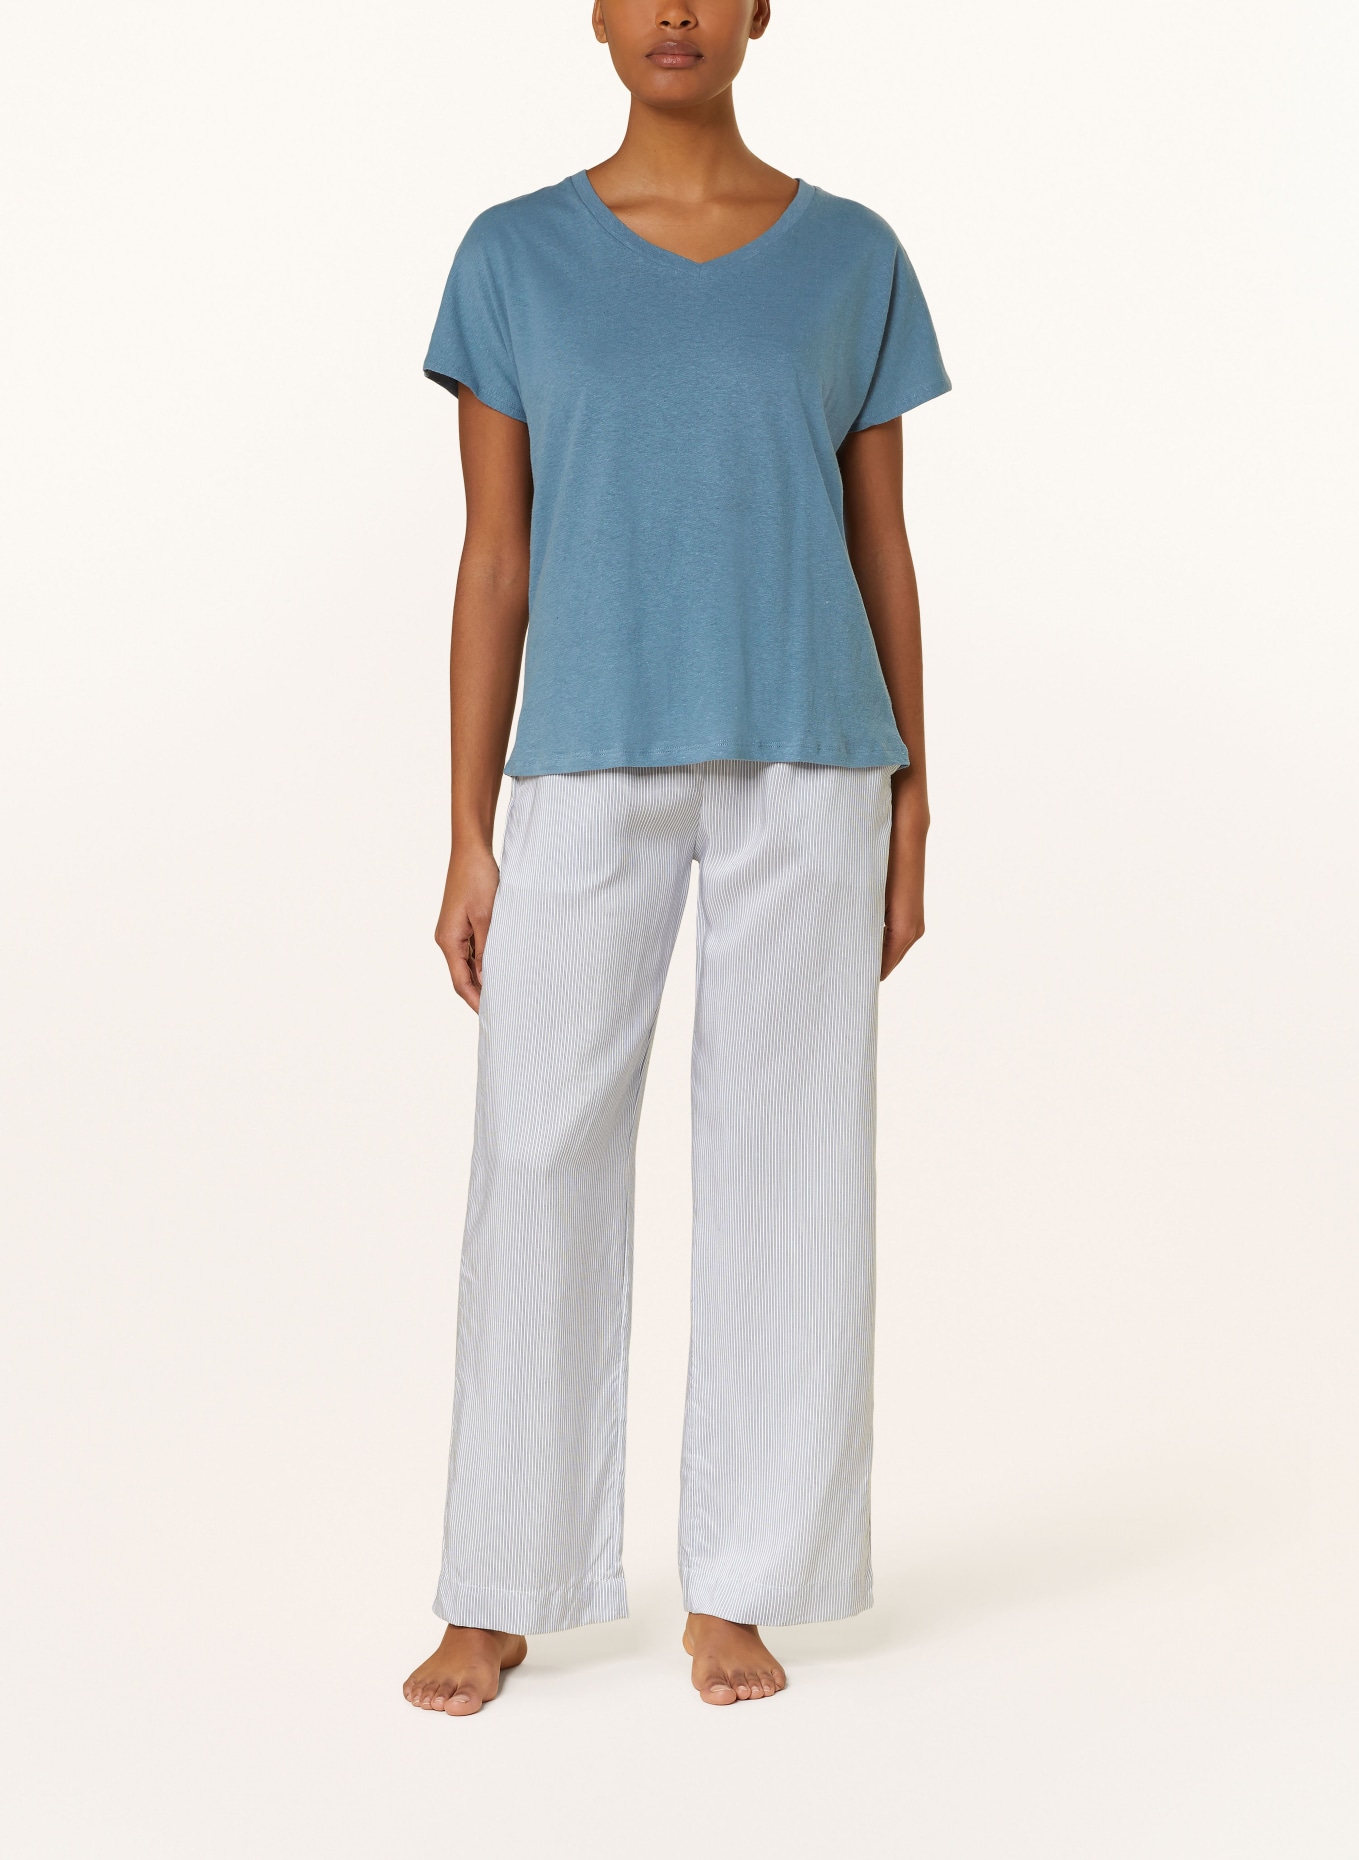 SCHIESSER Pajama shirt MIX + RELAX with linen, Color: BLUE GRAY (Image 2)